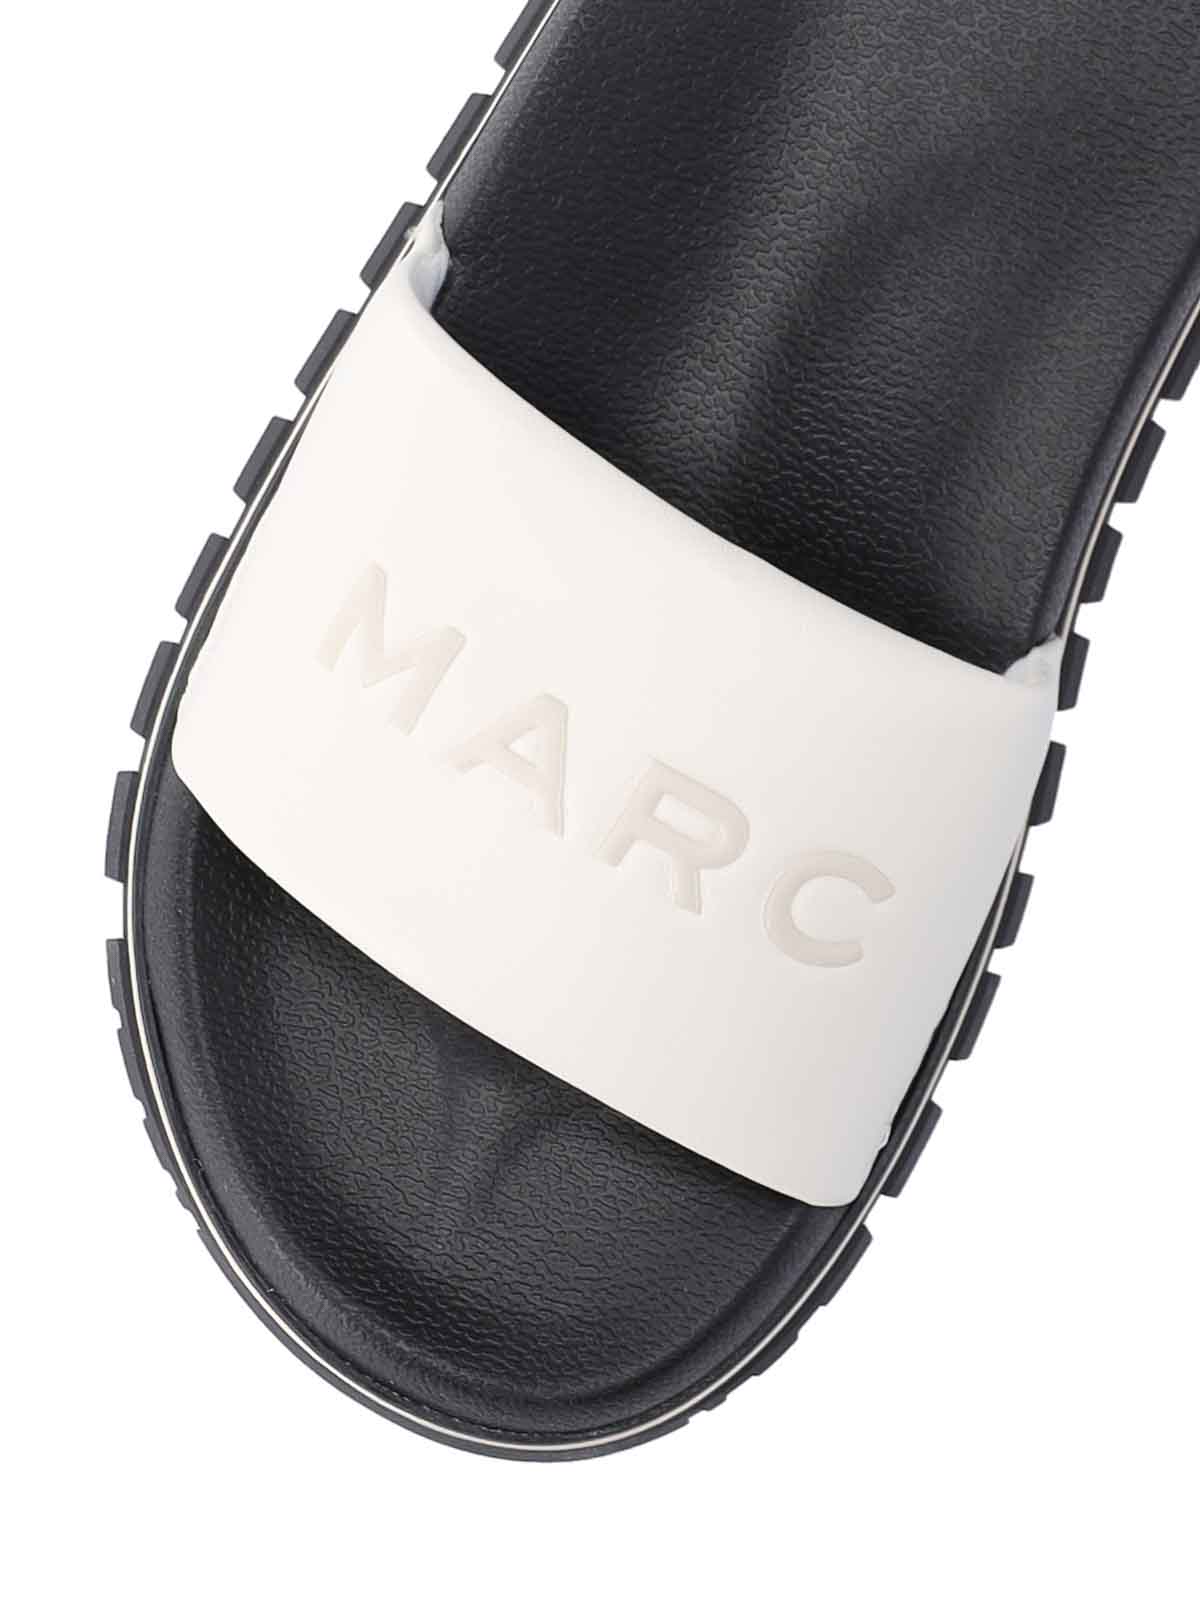 Shop Marc Jacobs Sliders Sandals In White